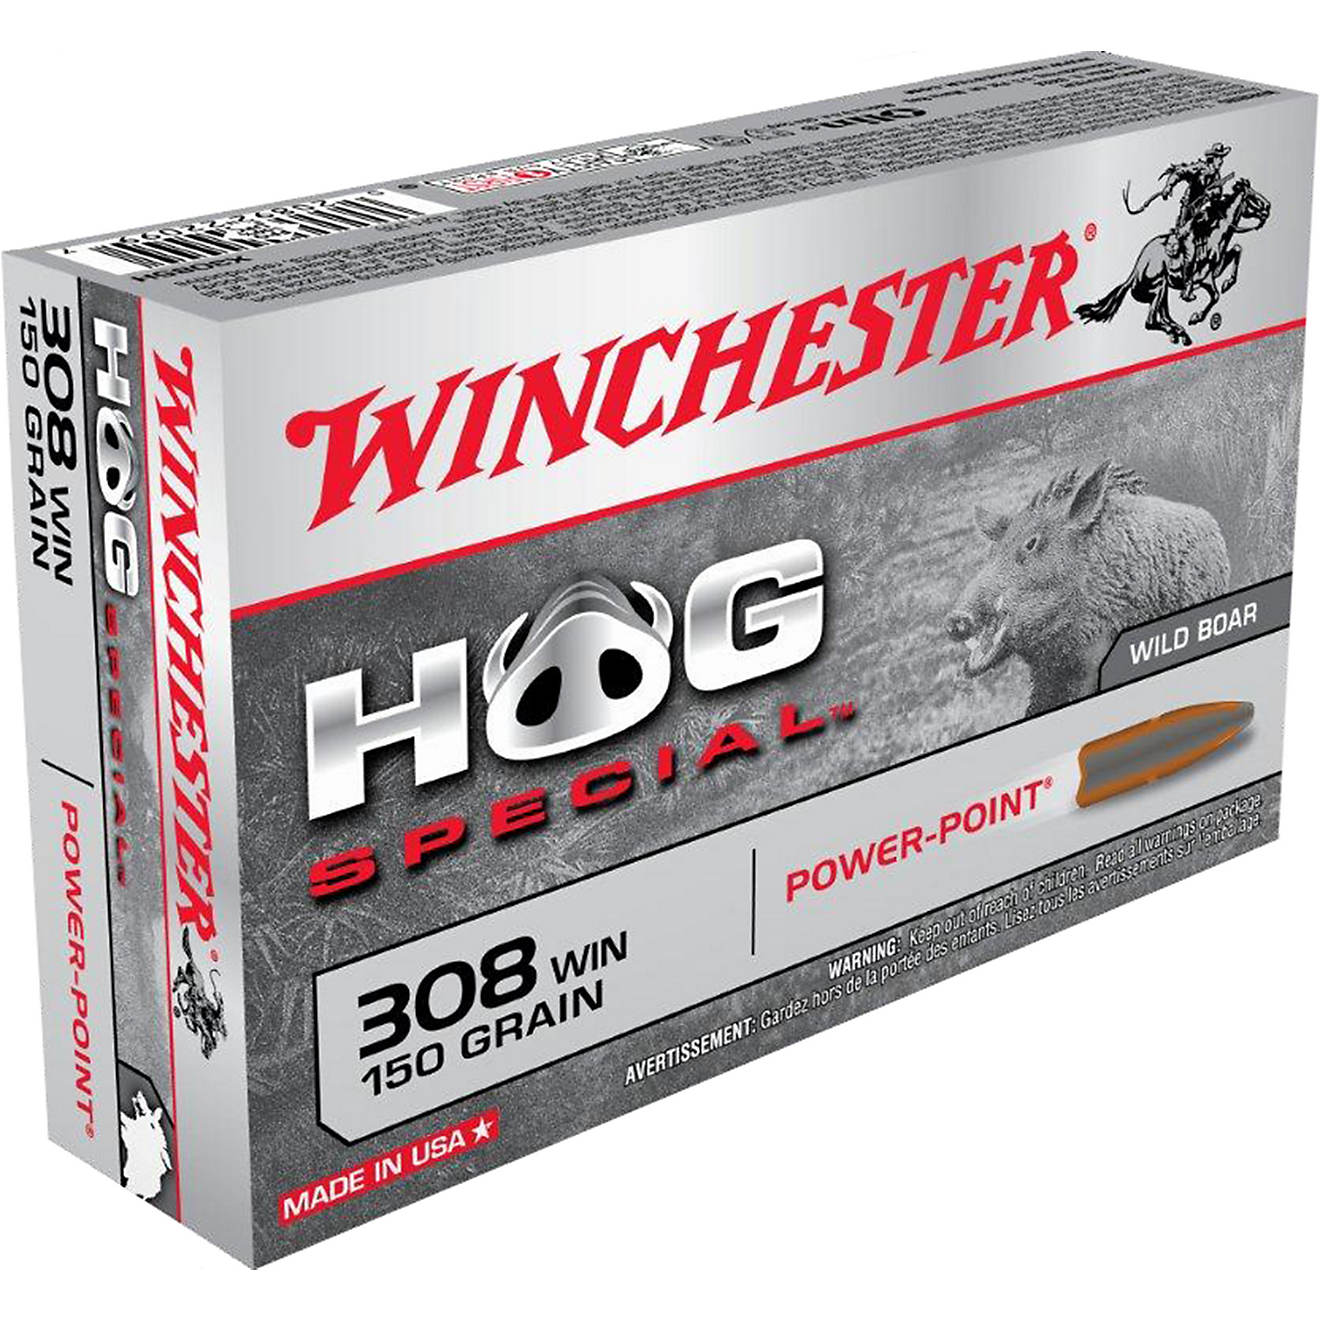 Winchester Power-Point Hog Special .308 Winchester 150-Grain Centerfire Rifle Ammunition - 20 Rounds                             - view number 1